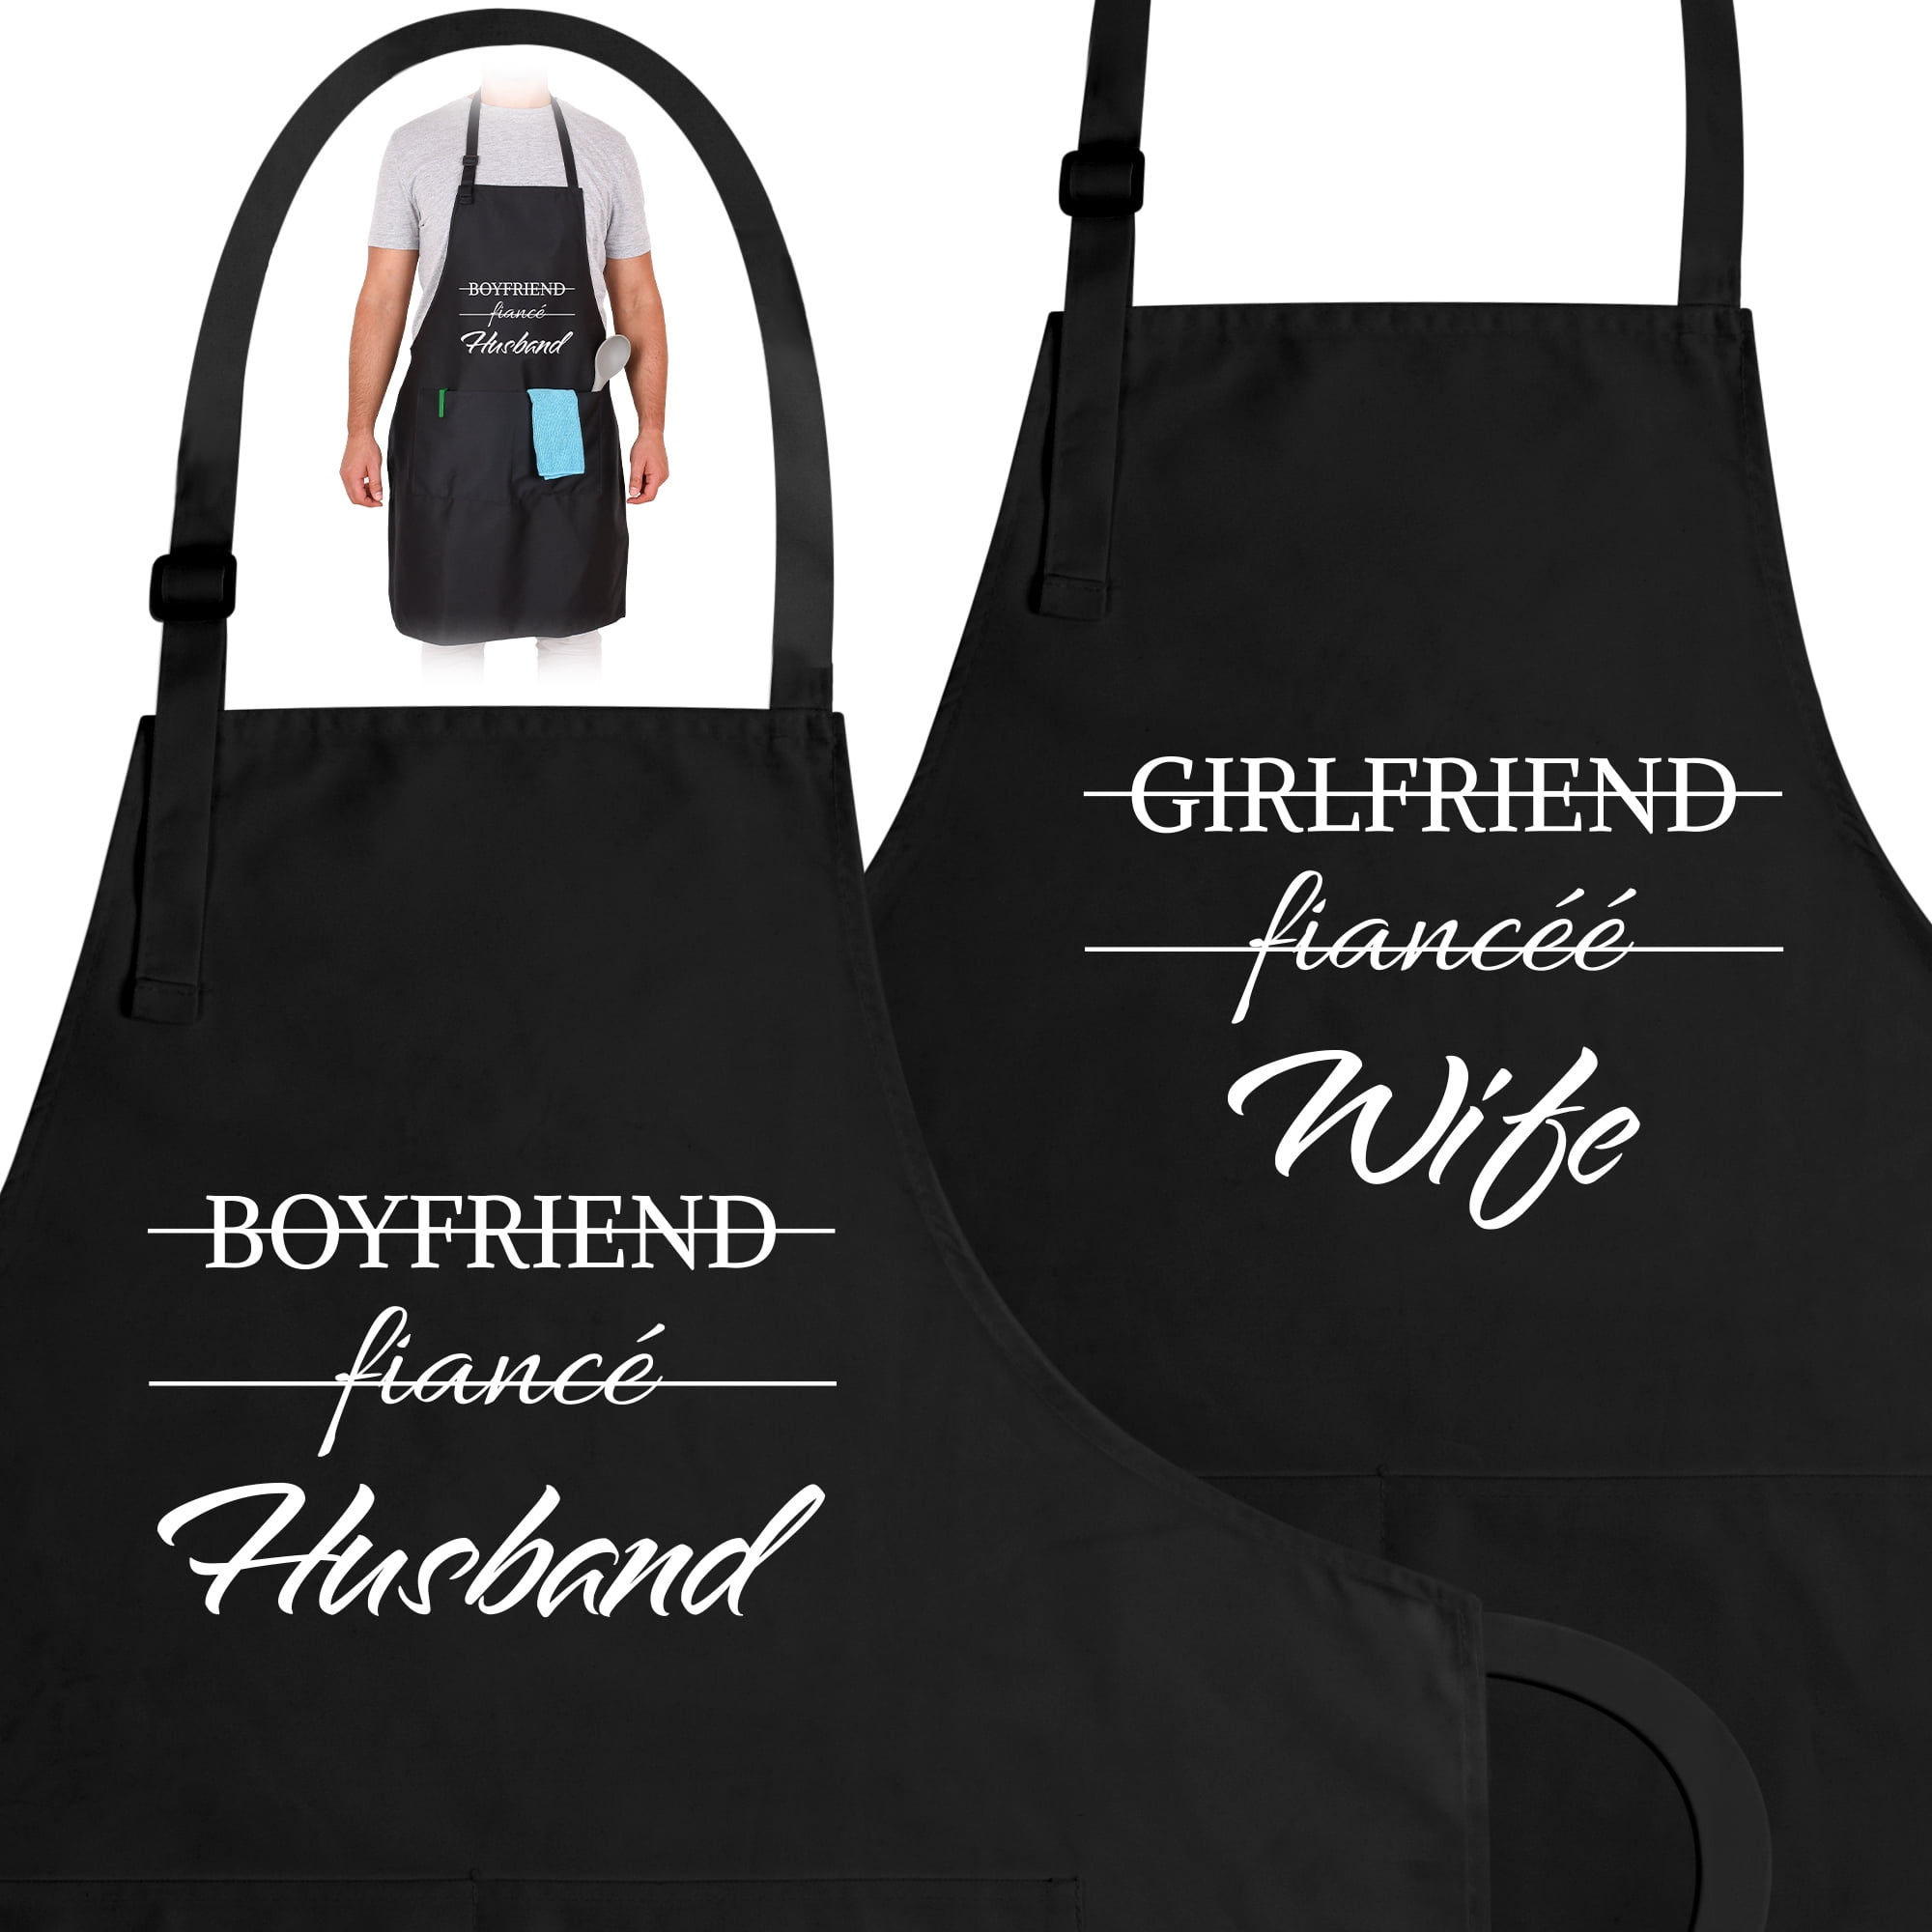 Zulay Kitchen Funny Aprons for Men, Women & Couples Black - Cooking Puns, 2  - Kroger